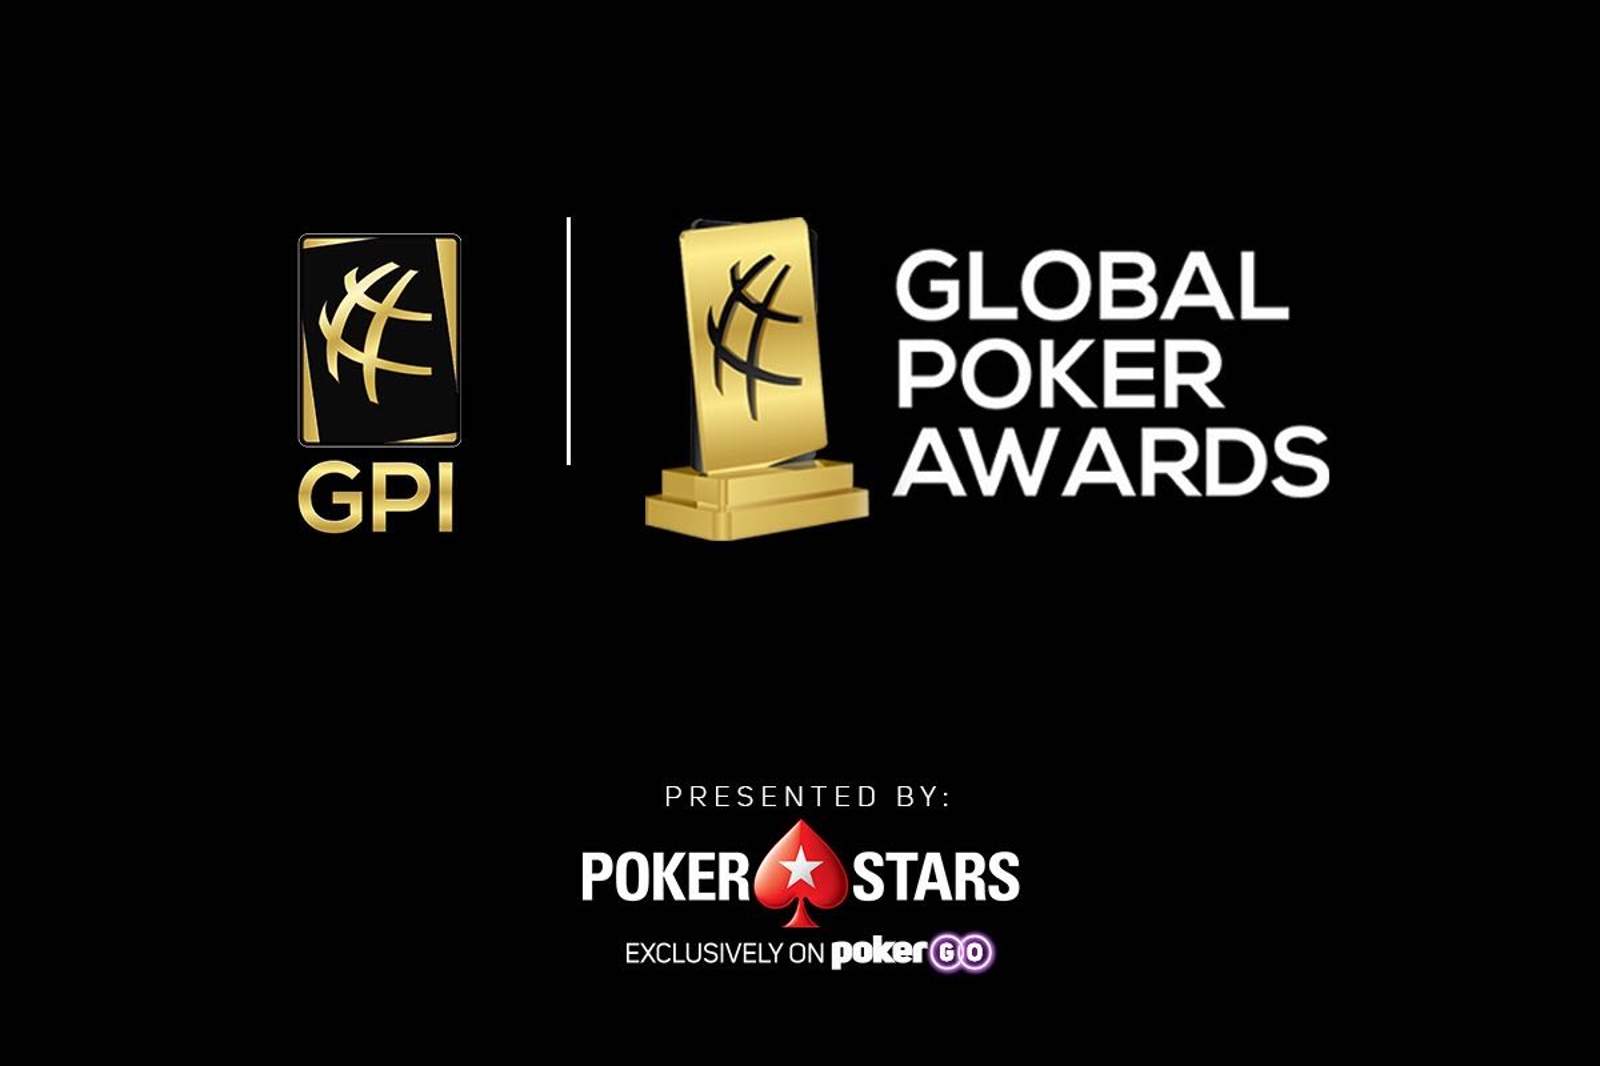 Poker Goes Worldwide with the Global Poker Awards